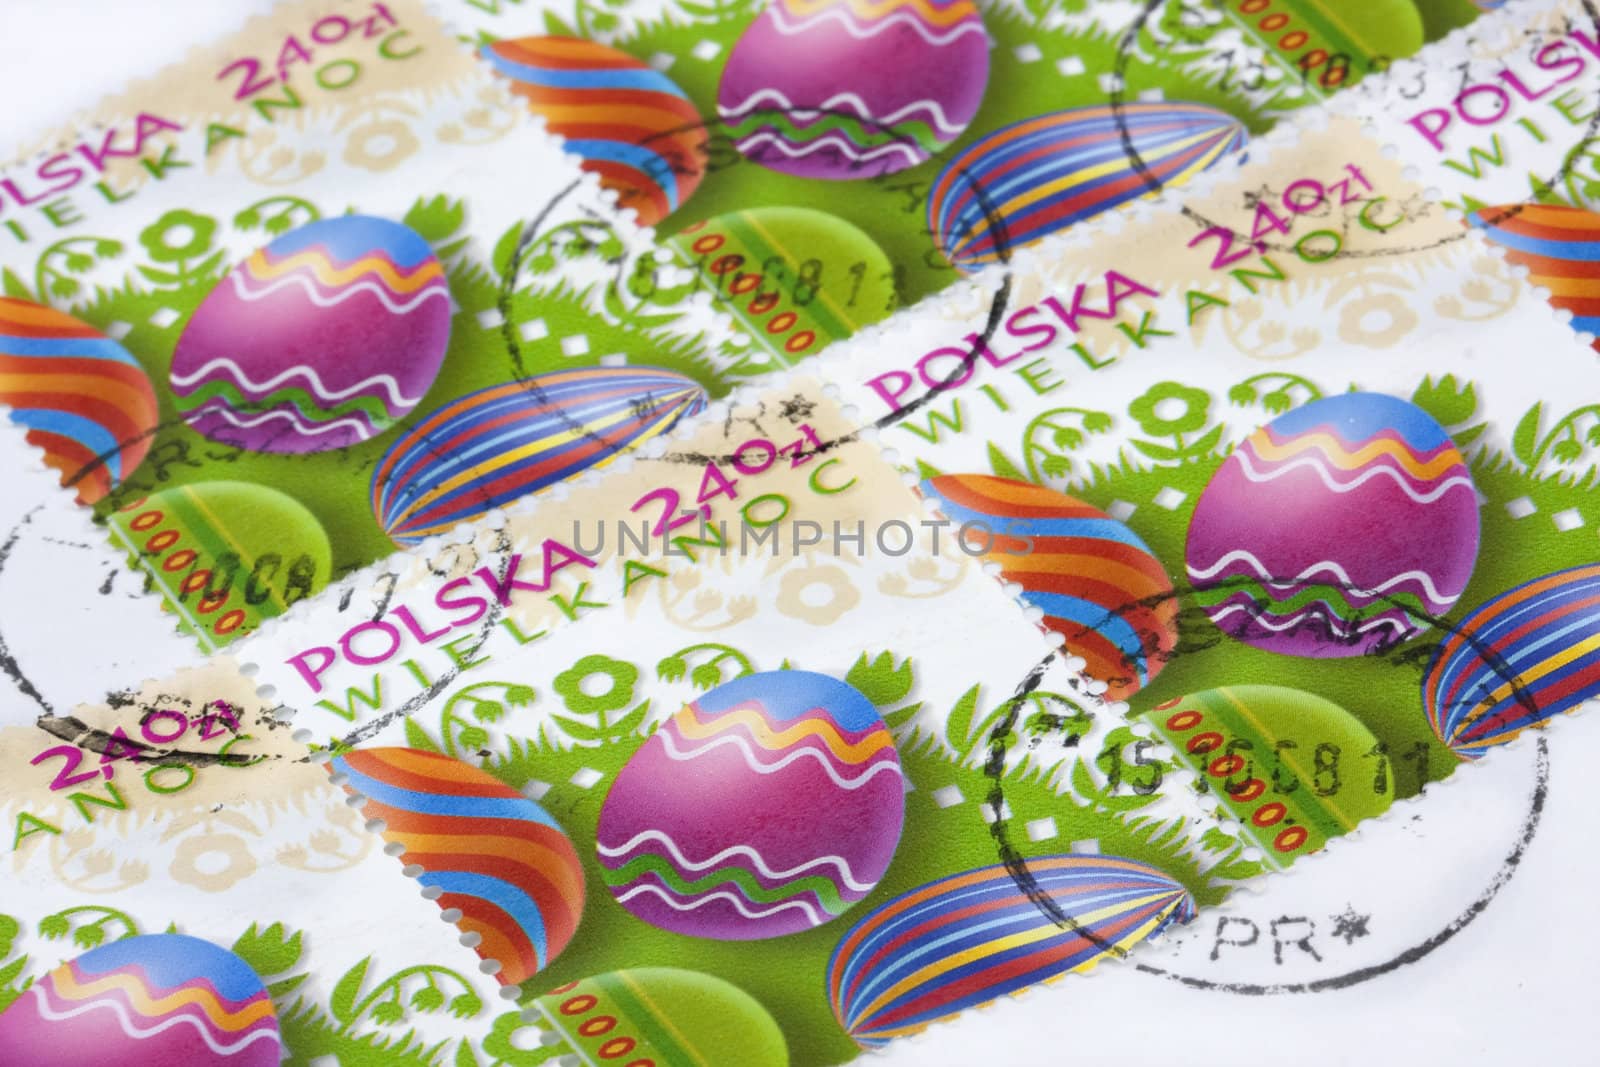 Easter (Wielkanoc) - colorful eggs and floral folk decorations on Polish post stamps canceled in Warsaw with original envelope as background